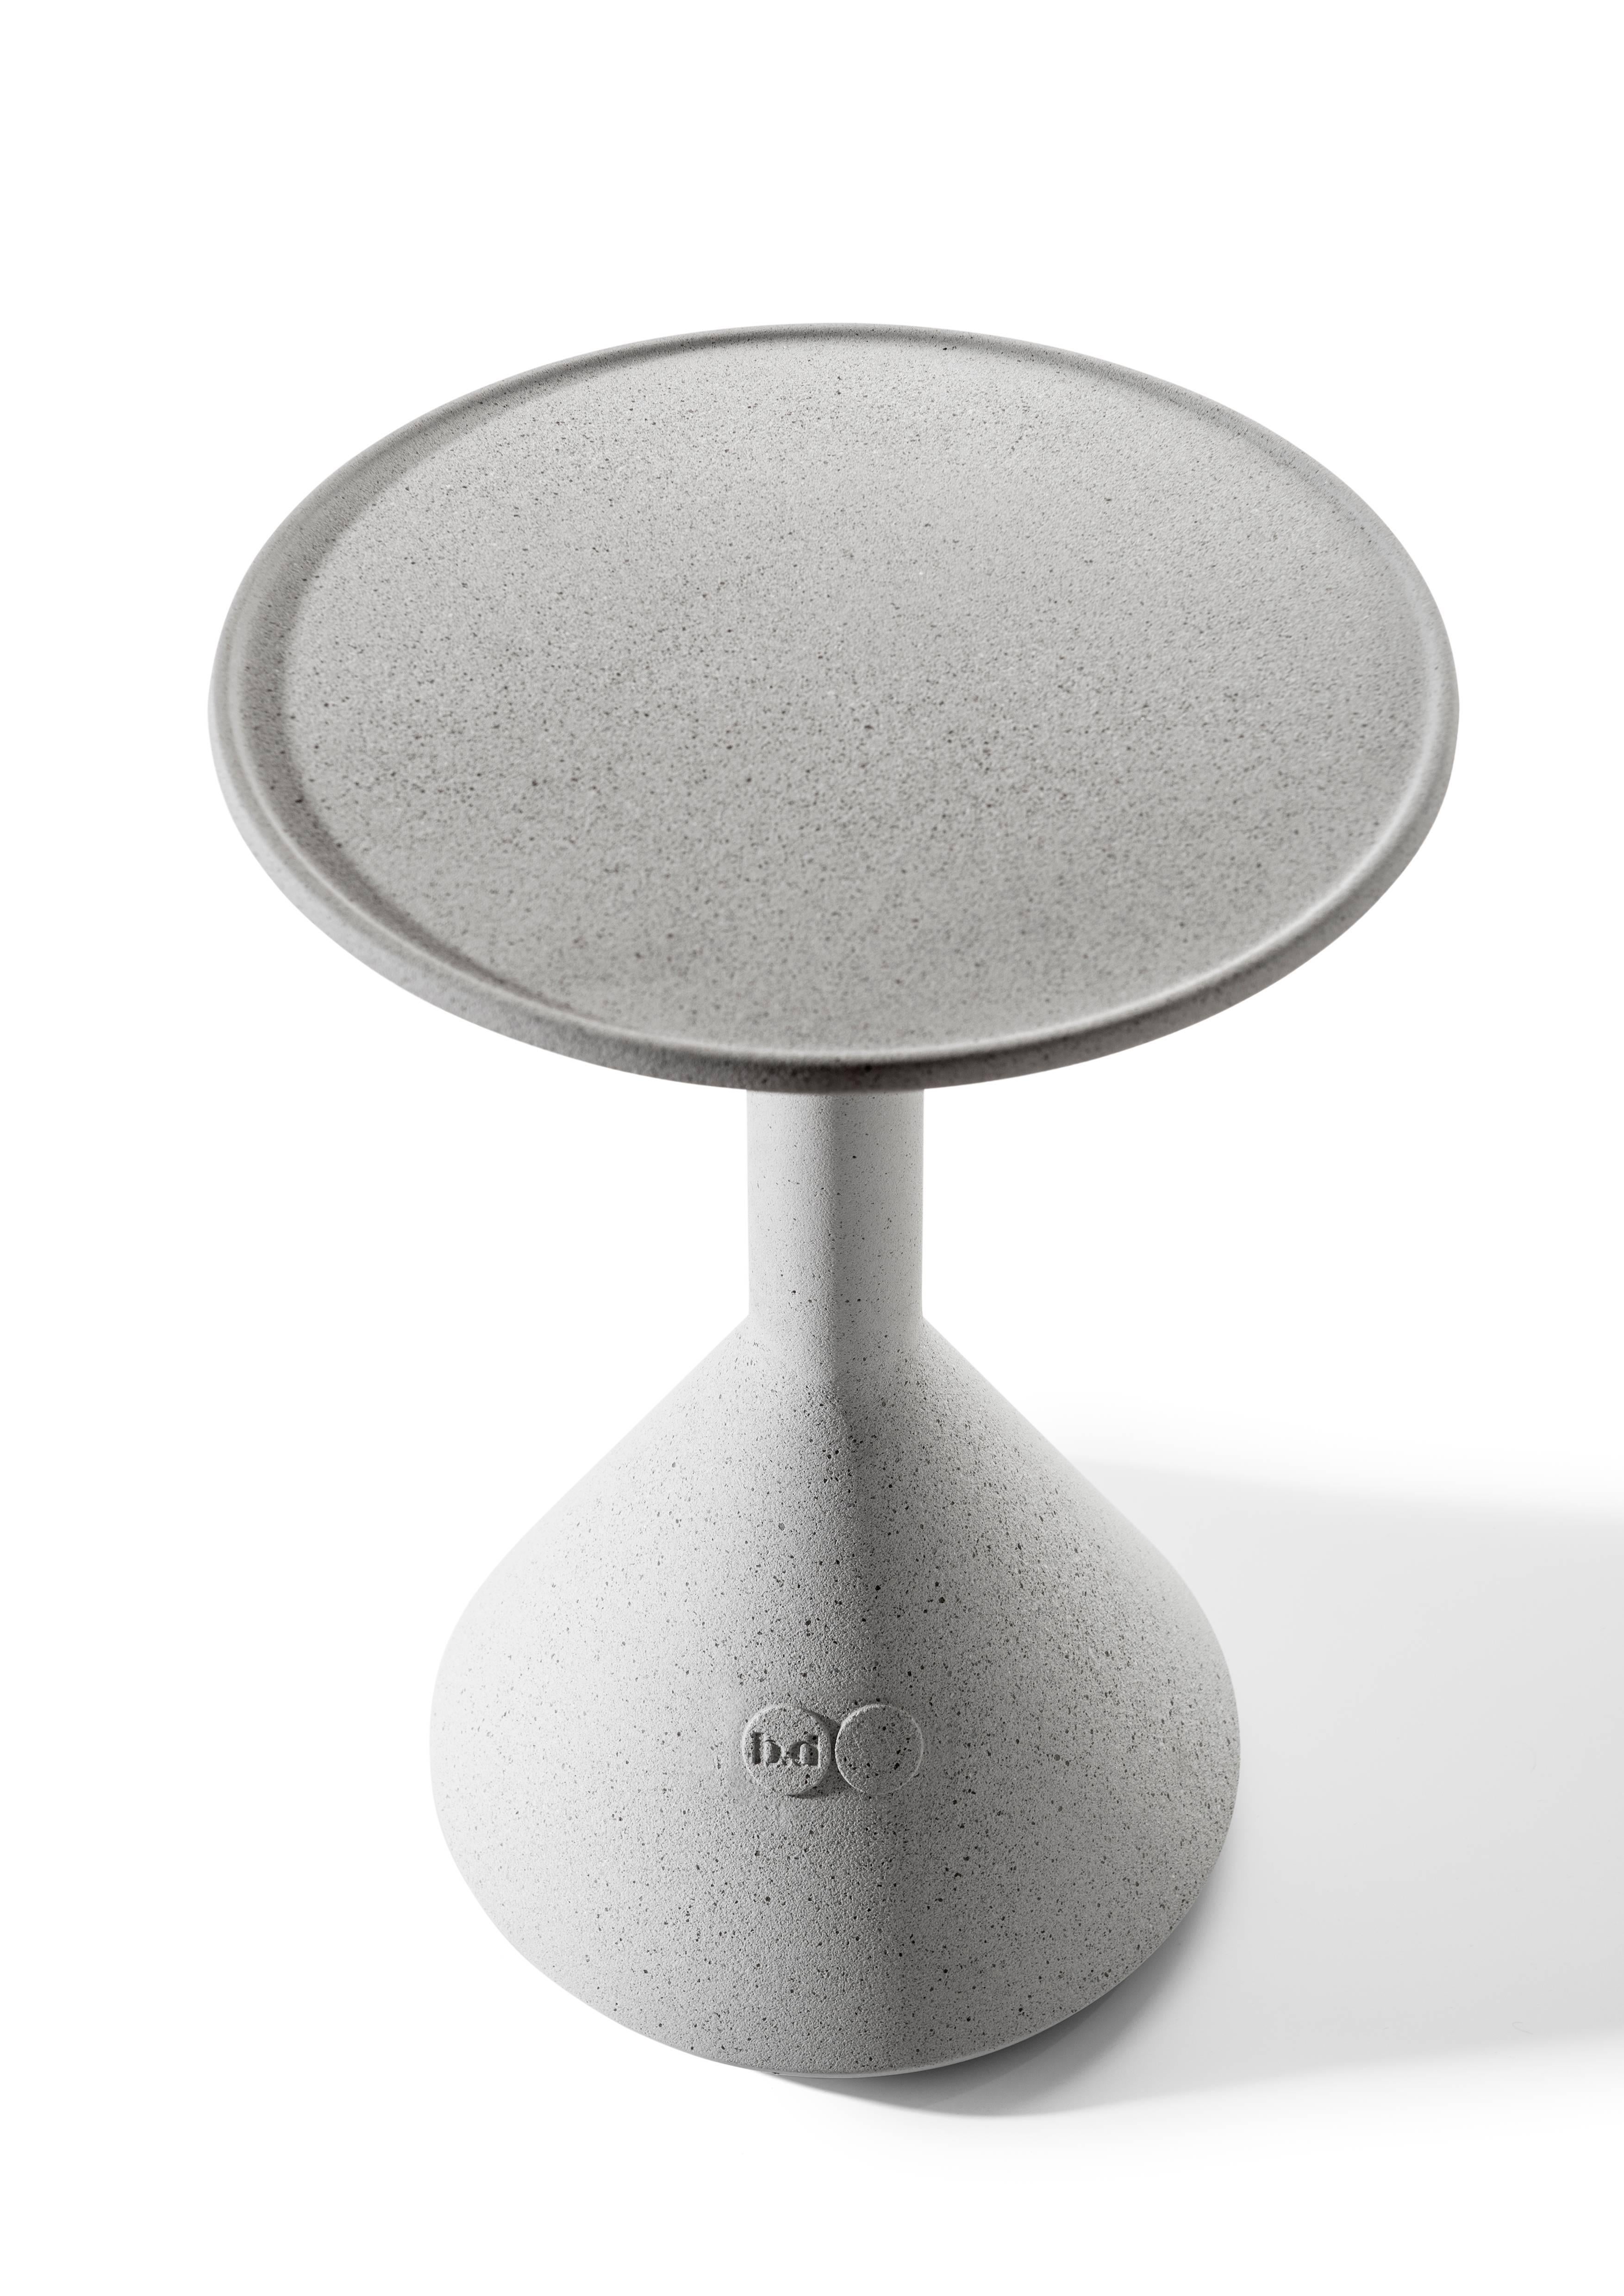 A solid and elegant side table of service, signed by one the most internationally prestigious designers, Konstantin Grcic. Made from architectonic concrete in grey or black. Grey finish is apt for indoor and outdoor.

Side table made of solid